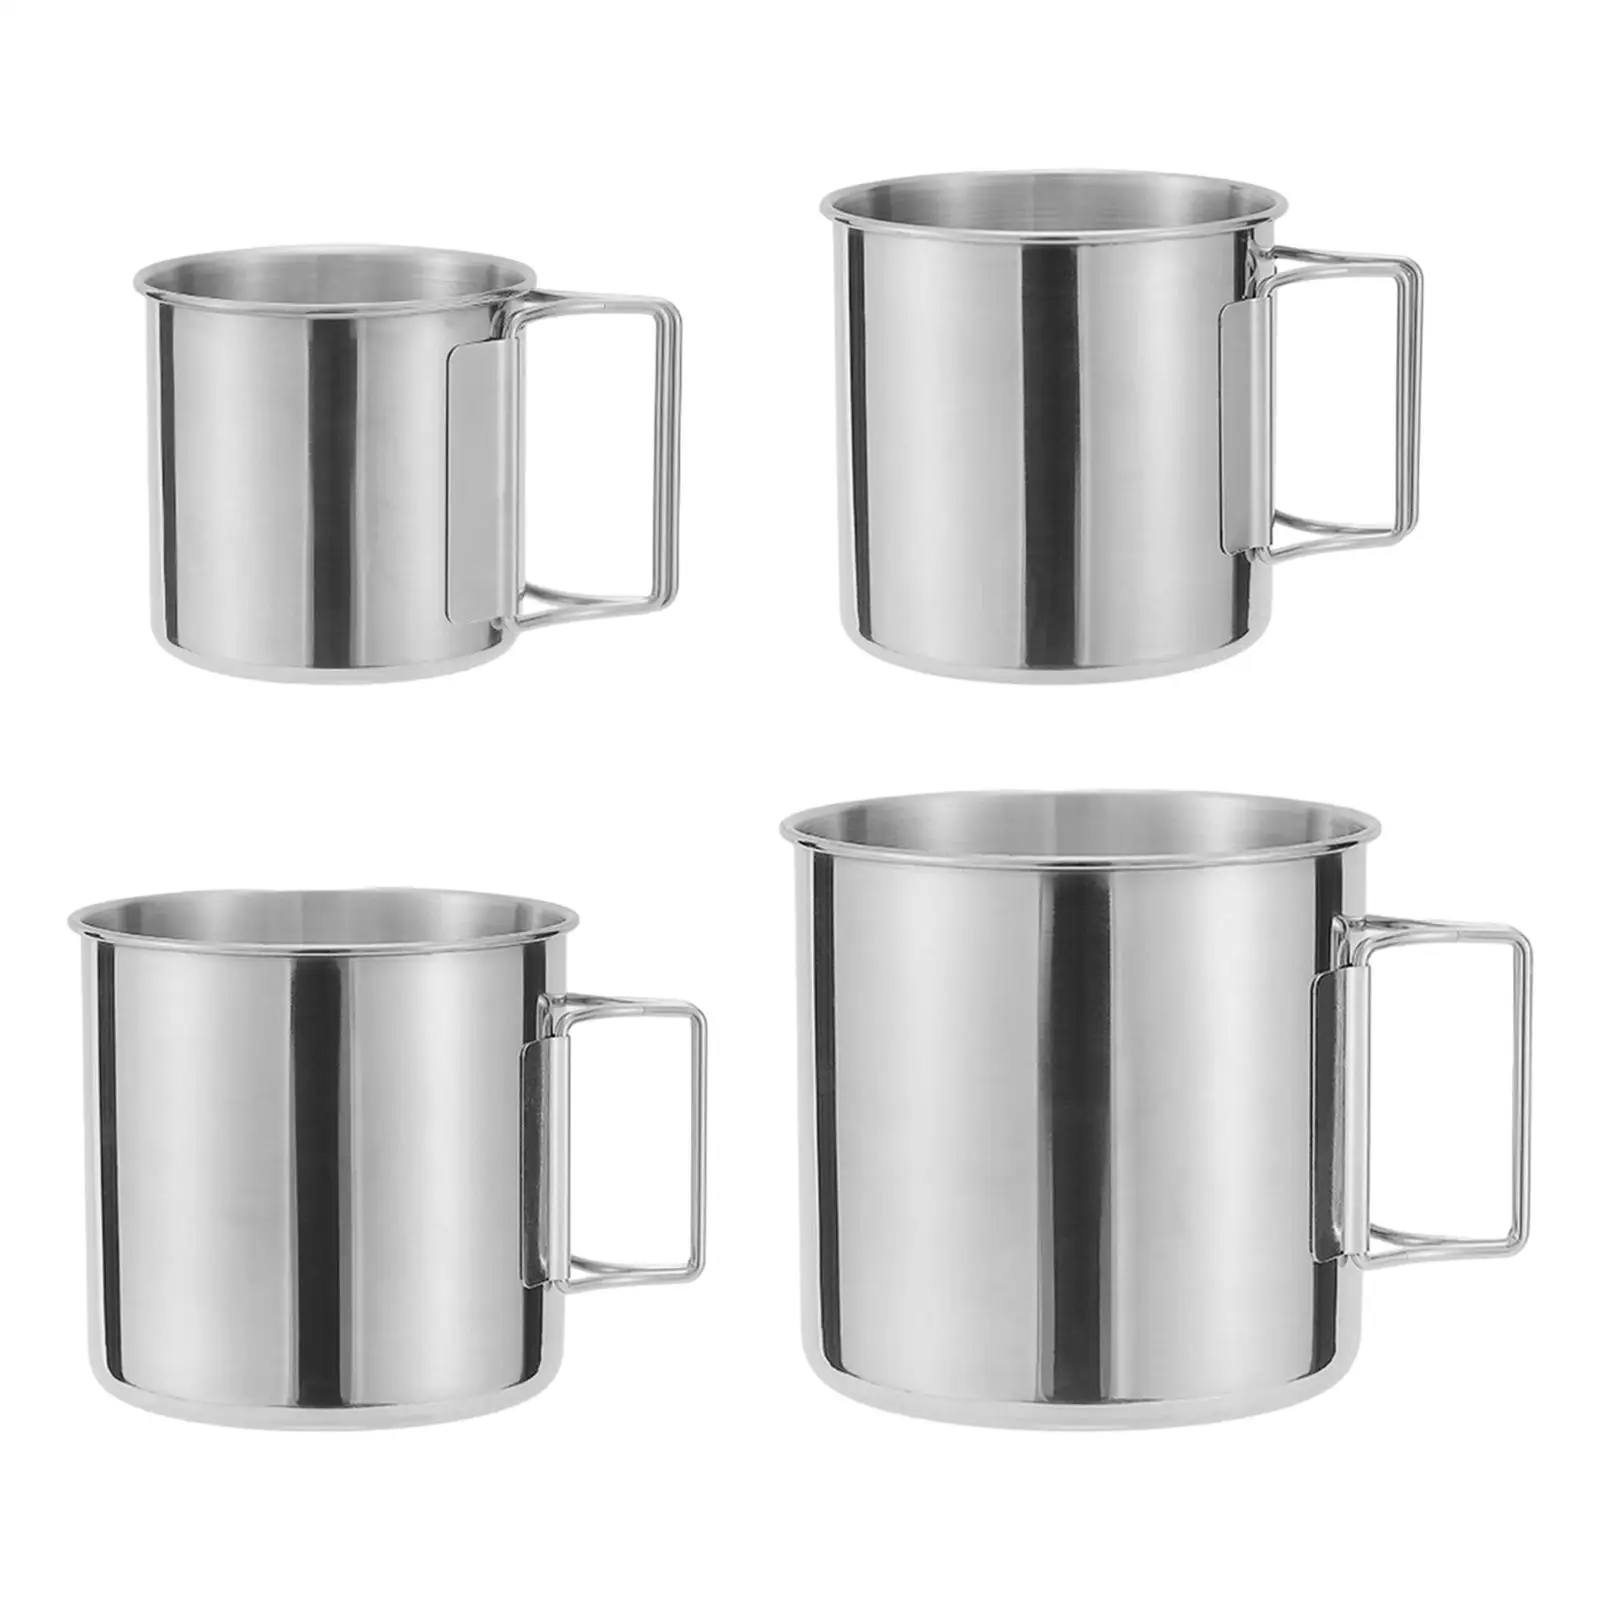 Camping Mug Water Cup Mug Kitchenware Teapot Stainless Steel Thermal Drinking Cup Coffee Cup for Outdoors Backpacking Travel